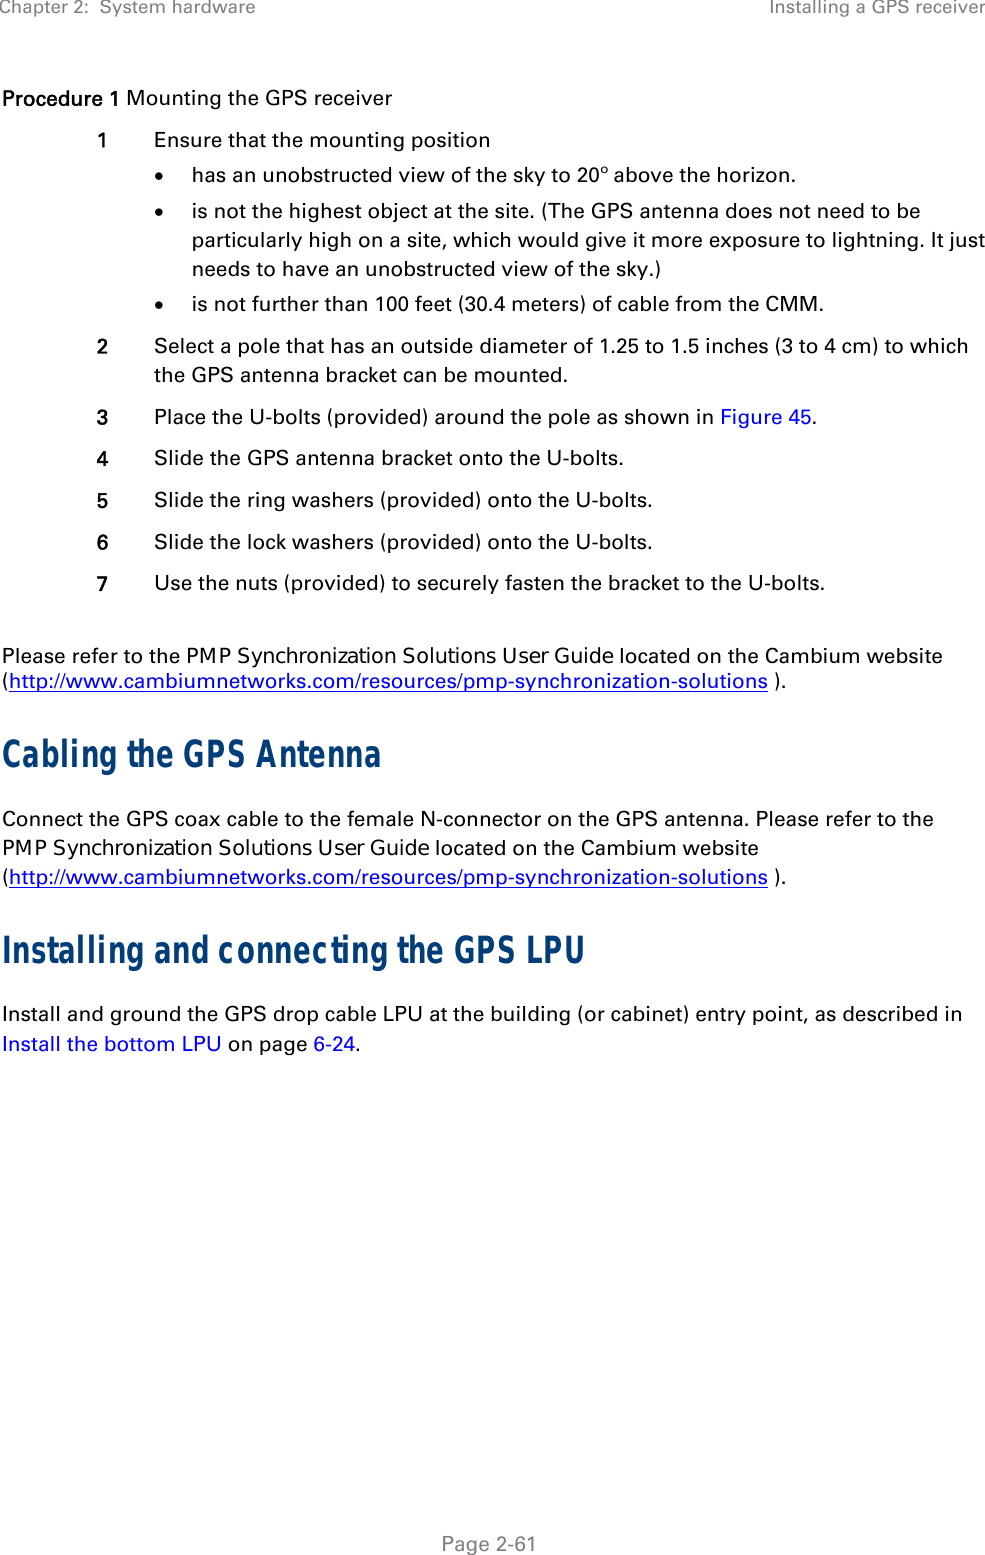 Chapter 2:  System hardware  Installing a GPS receiver   Page 2-61 Procedure 1 Mounting the GPS receiver 1  Ensure that the mounting position  has an unobstructed view of the sky to 20º above the horizon.  is not the highest object at the site. (The GPS antenna does not need to be particularly high on a site, which would give it more exposure to lightning. It just needs to have an unobstructed view of the sky.)  is not further than 100 feet (30.4 meters) of cable from the CMM. 2  Select a pole that has an outside diameter of 1.25 to 1.5 inches (3 to 4 cm) to which the GPS antenna bracket can be mounted. 3  Place the U-bolts (provided) around the pole as shown in Figure 45. 4  Slide the GPS antenna bracket onto the U-bolts. 5  Slide the ring washers (provided) onto the U-bolts. 6  Slide the lock washers (provided) onto the U-bolts. 7  Use the nuts (provided) to securely fasten the bracket to the U-bolts.  Please refer to the PMP Synchronization Solutions User Guide located on the Cambium website (http://www.cambiumnetworks.com/resources/pmp-synchronization-solutions ). Cabling the GPS Antenna Connect the GPS coax cable to the female N-connector on the GPS antenna. Please refer to the PMP Synchronization Solutions User Guide located on the Cambium website (http://www.cambiumnetworks.com/resources/pmp-synchronization-solutions ). Installing and connecting the GPS LPU Install and ground the GPS drop cable LPU at the building (or cabinet) entry point, as described in Install the bottom LPU on page 6-24.  